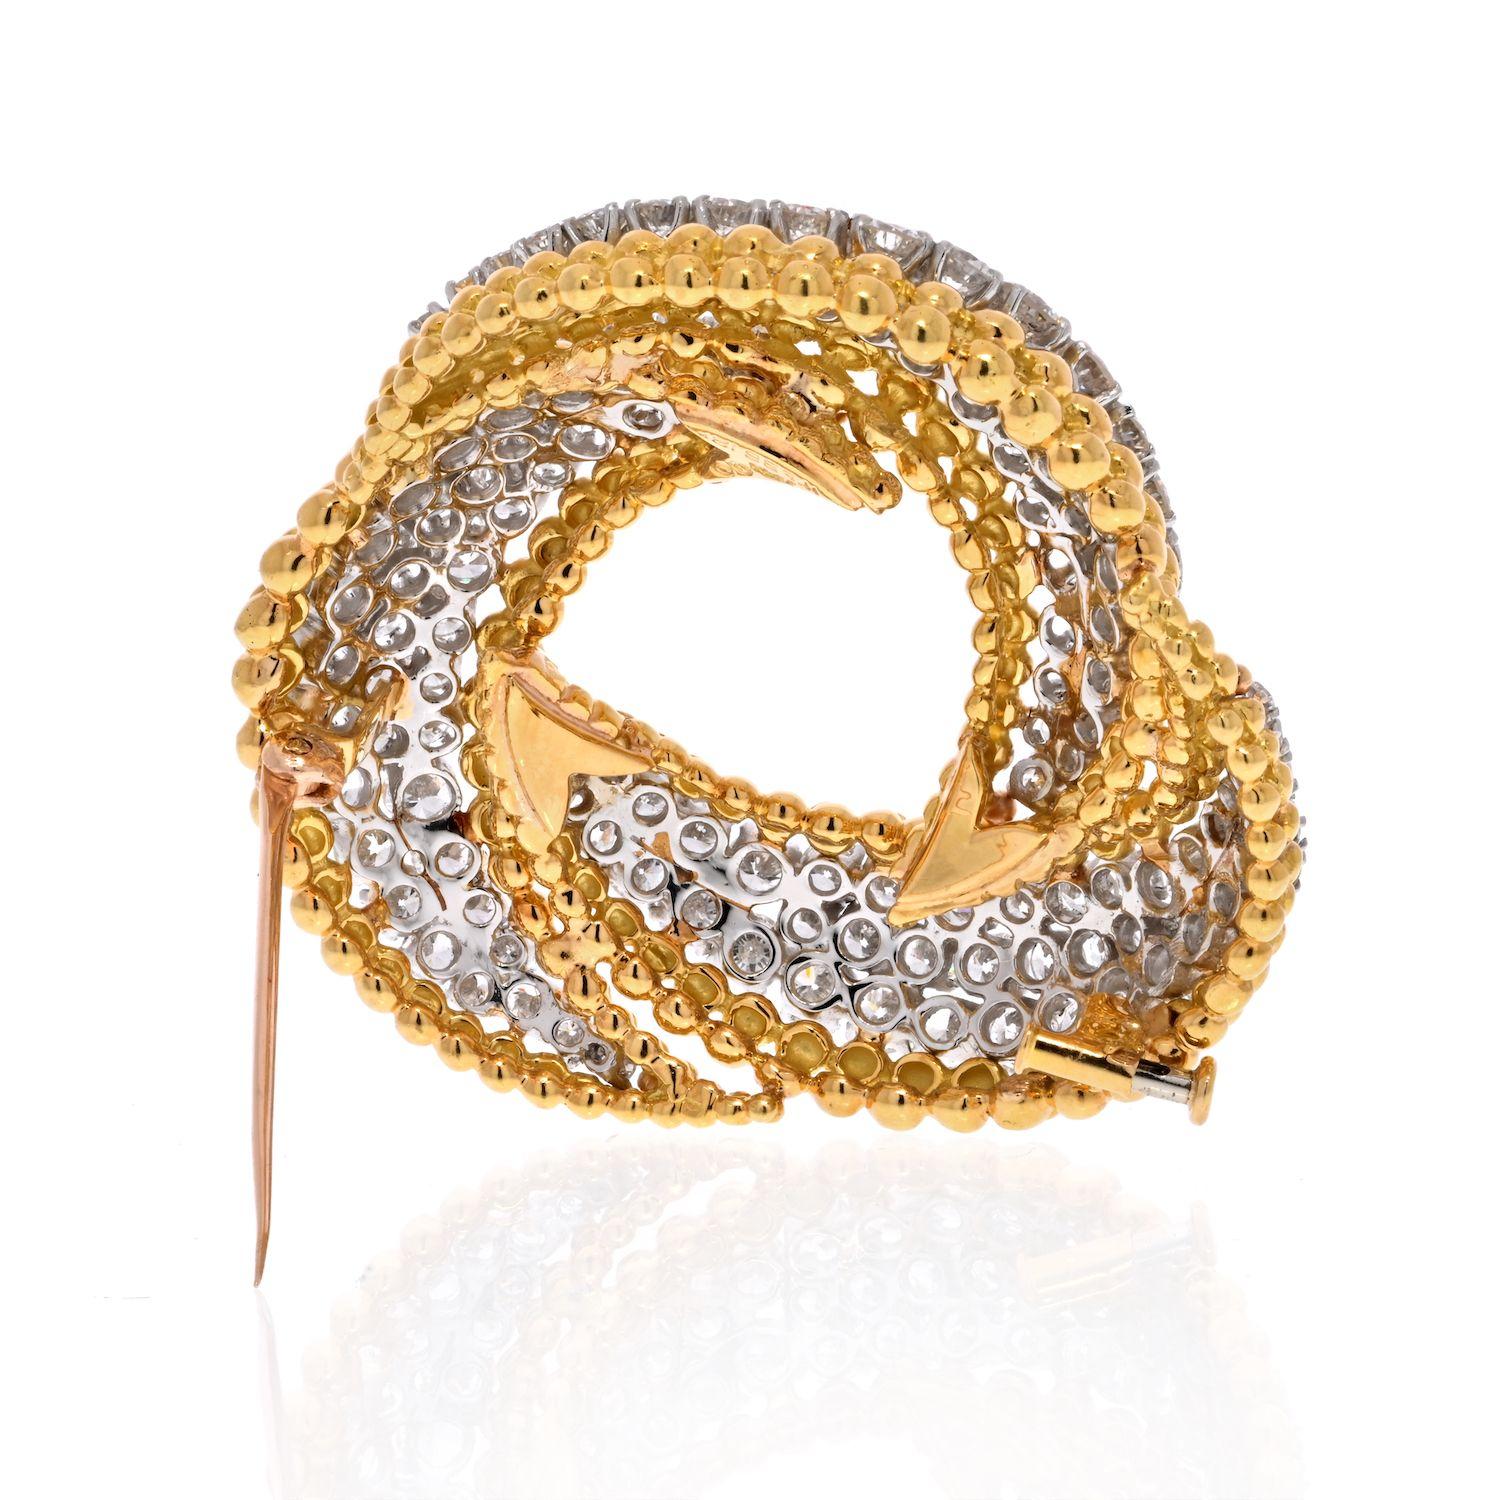 Mounted with 123 round brilliant cut diamonds this brooch is sure to be the center of attention. Designed and crafted by David Webb in Platinum & 18K Yellow Gold mounted with 15 Carats of diamonds in a swirl knot motif. 
About 1 inch wide. 